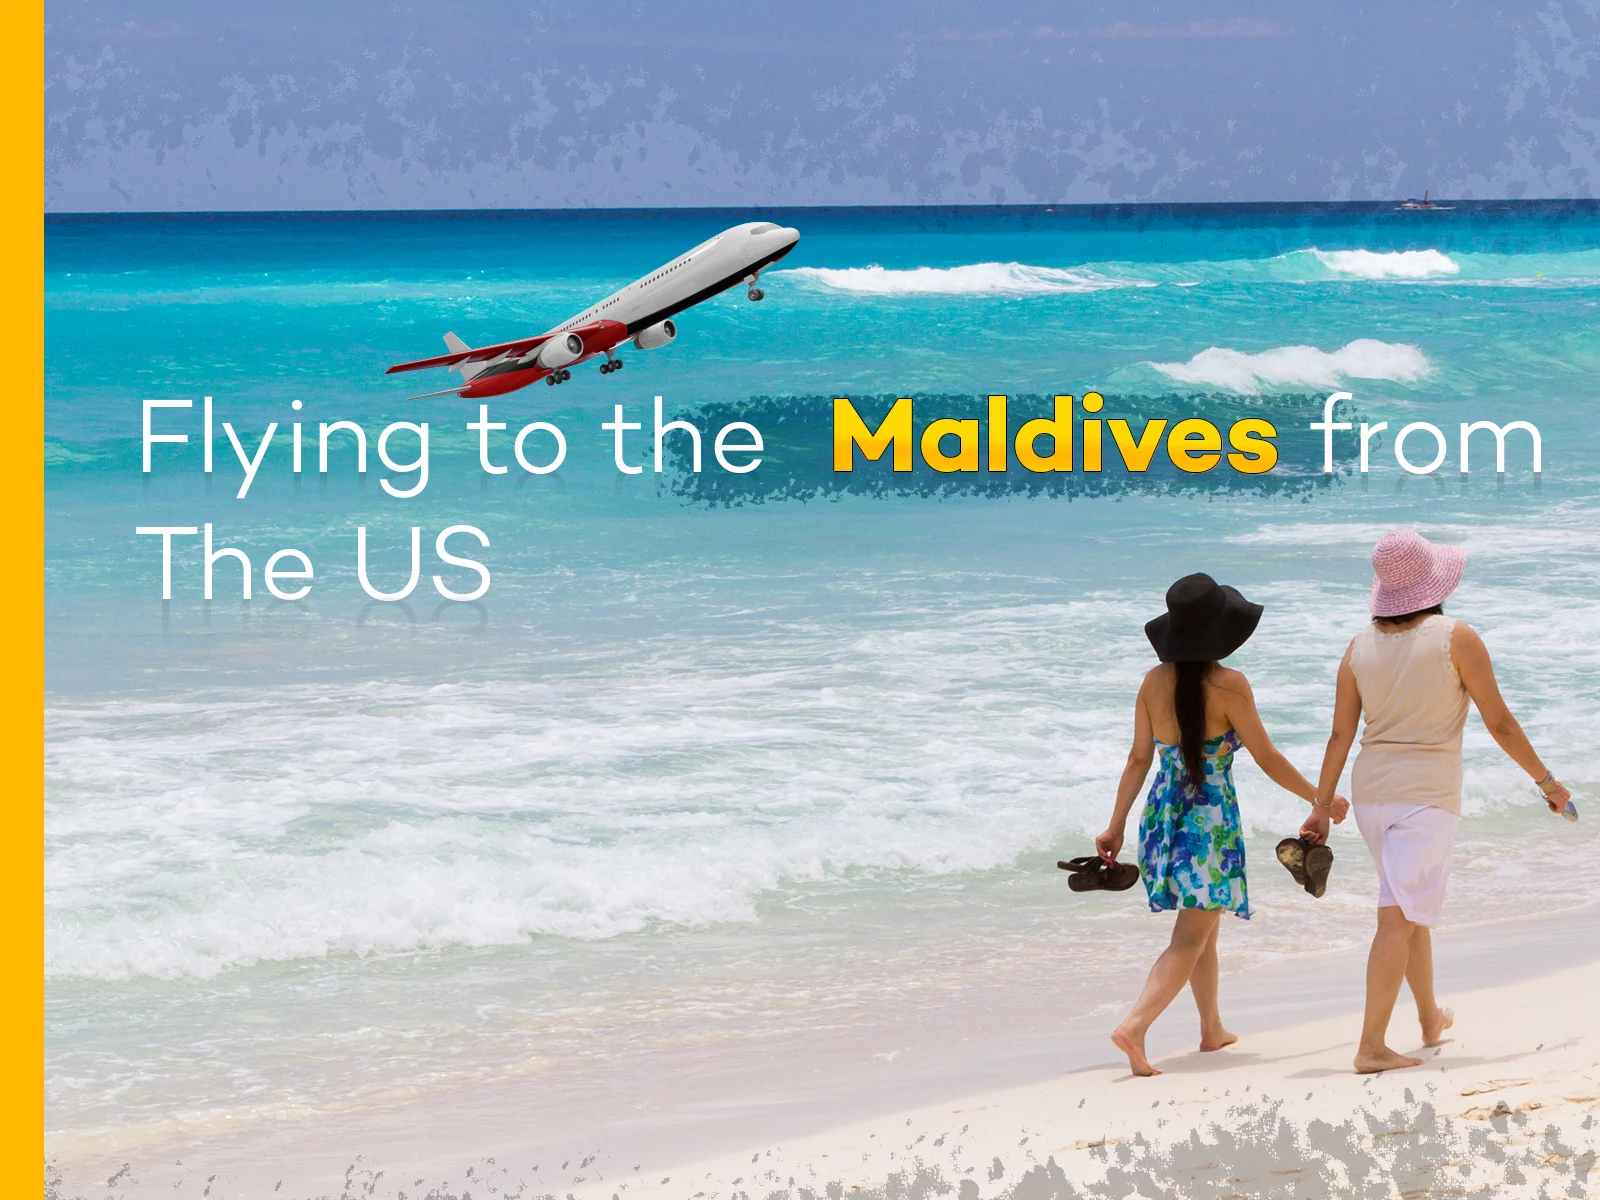 Flying to the Maldives from the US.